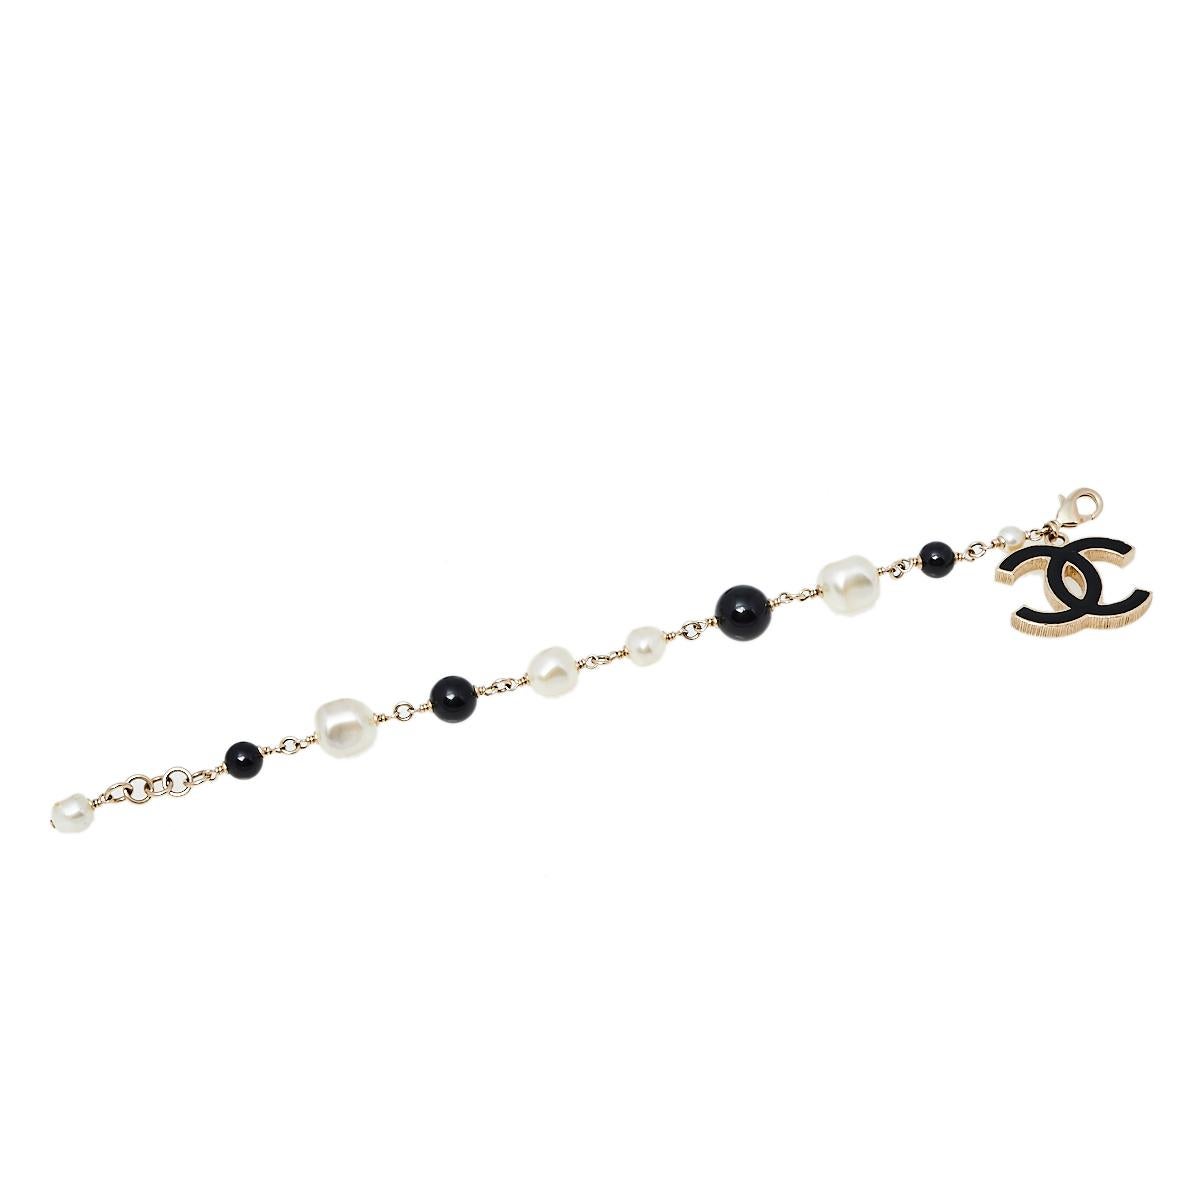 Bound to sit around your wrist and exude beauty, this Chanel piece is a dream buy. It is made from gold-tone metal and on the chain, there are faux pearls, beads, and a dangling CC charm coated with black enamel. The bracelet can be fastened to your